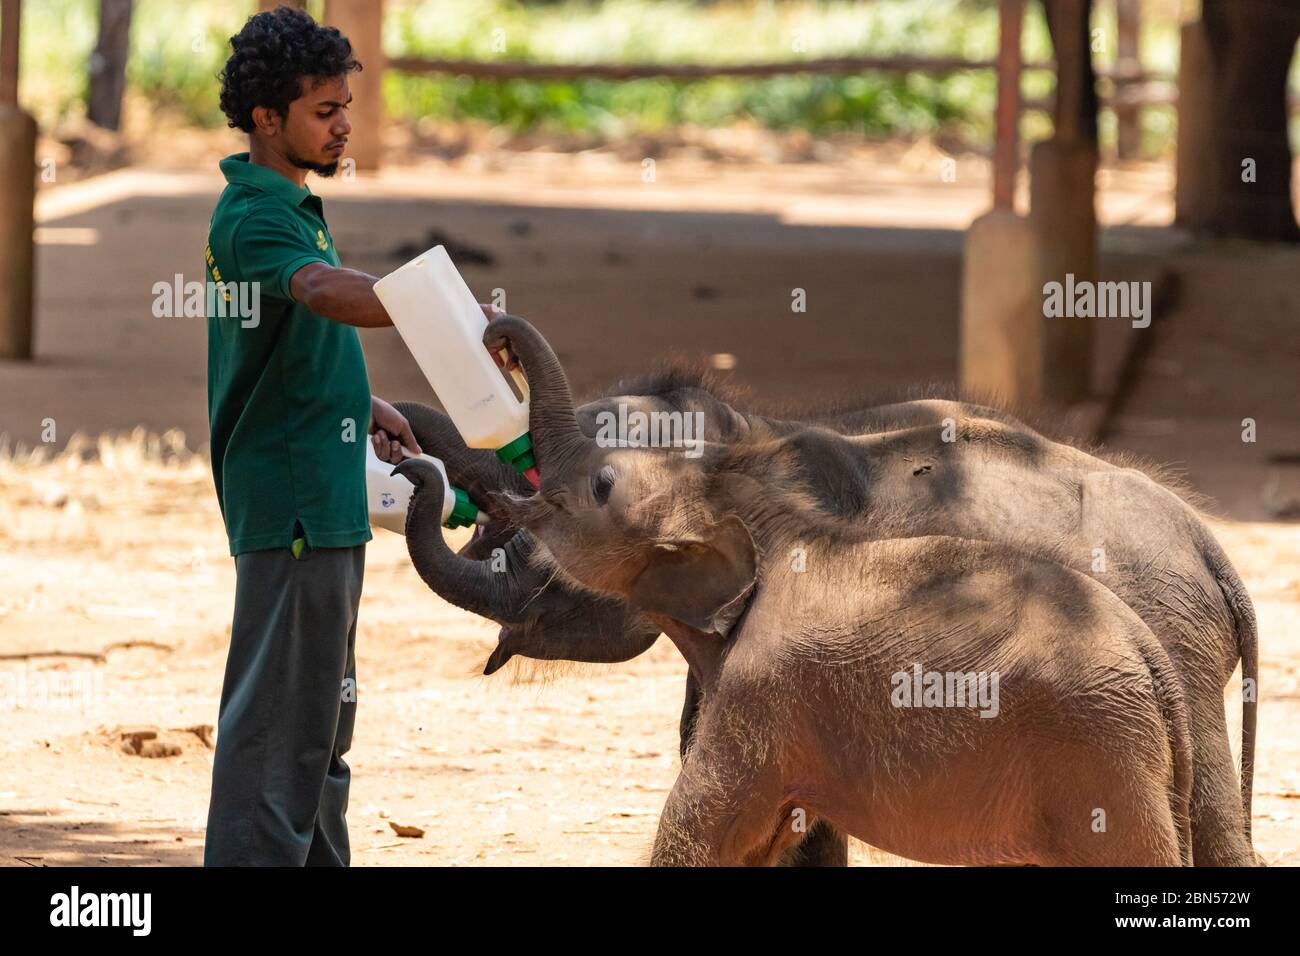 Keeper feeding baby elephants milk from a bottle at a sanctuary in a conservation concept Stock Photo